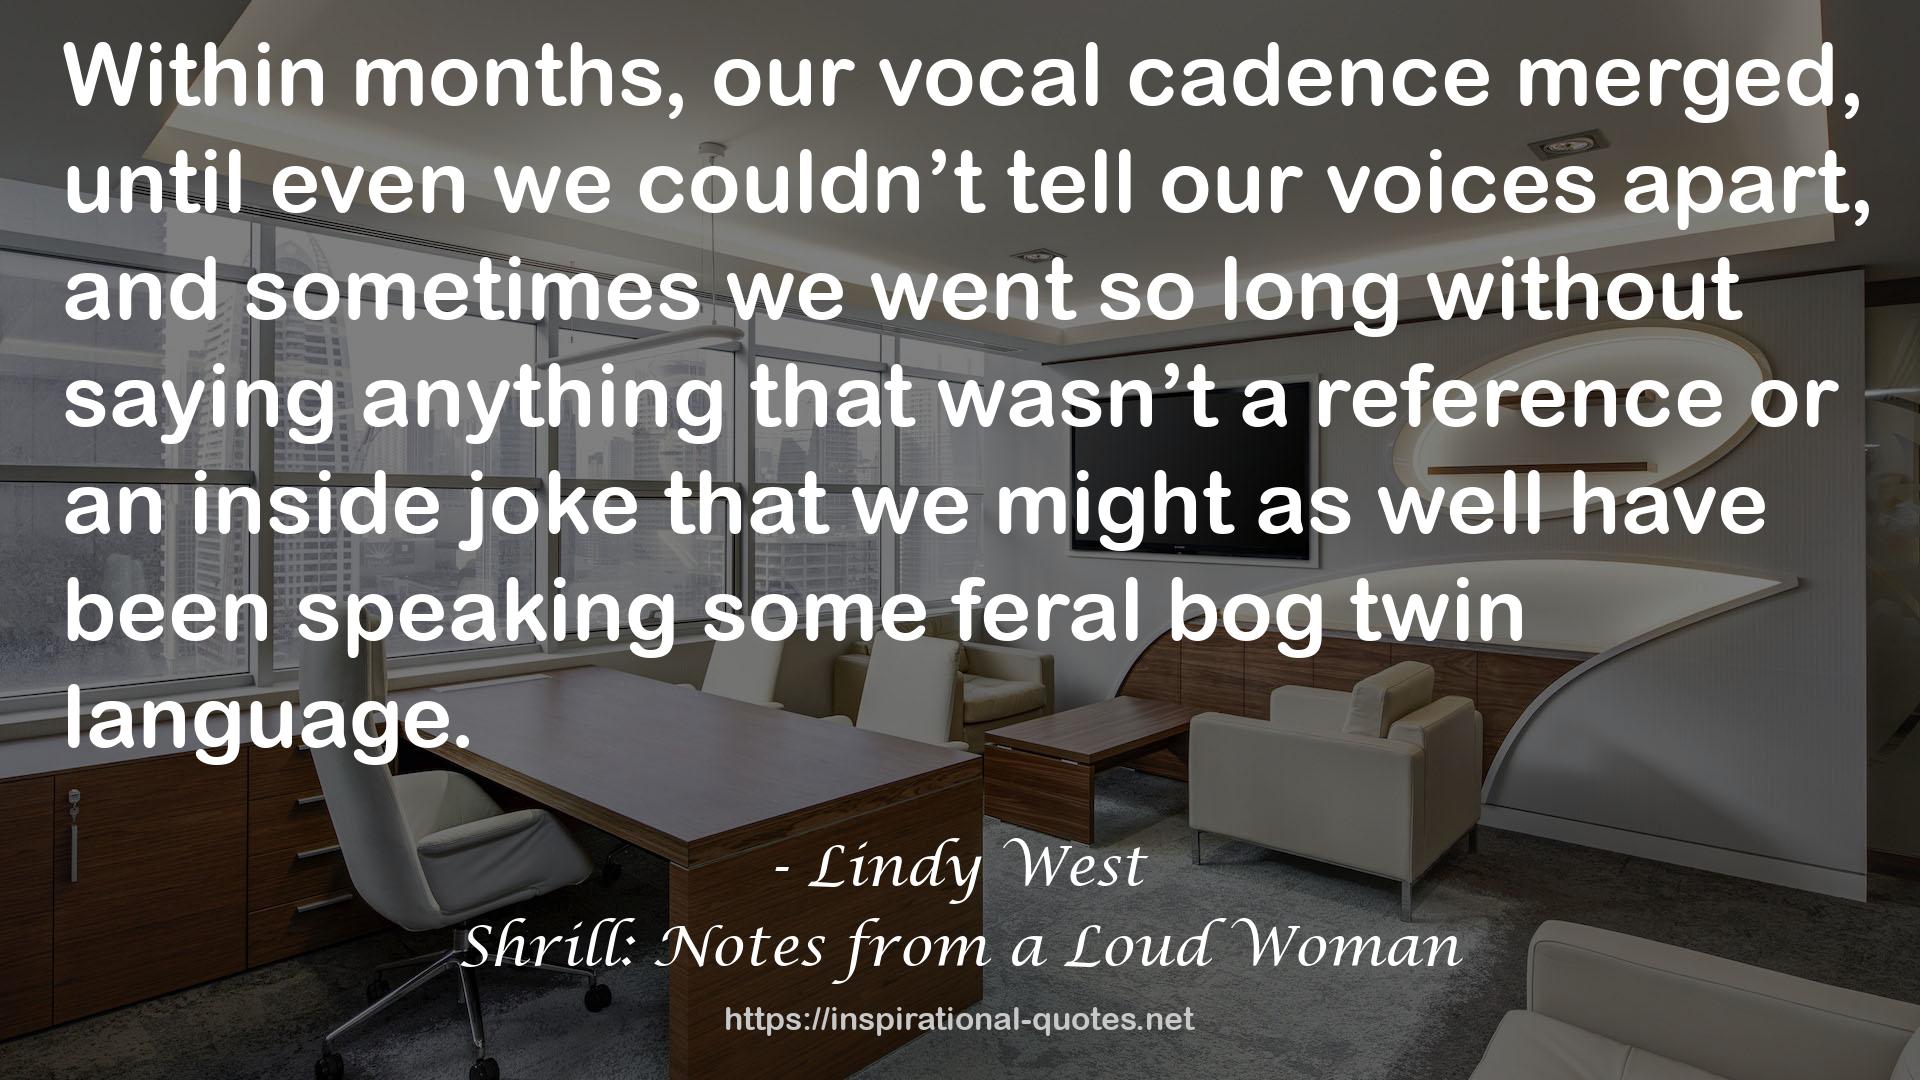 Shrill: Notes from a Loud Woman QUOTES